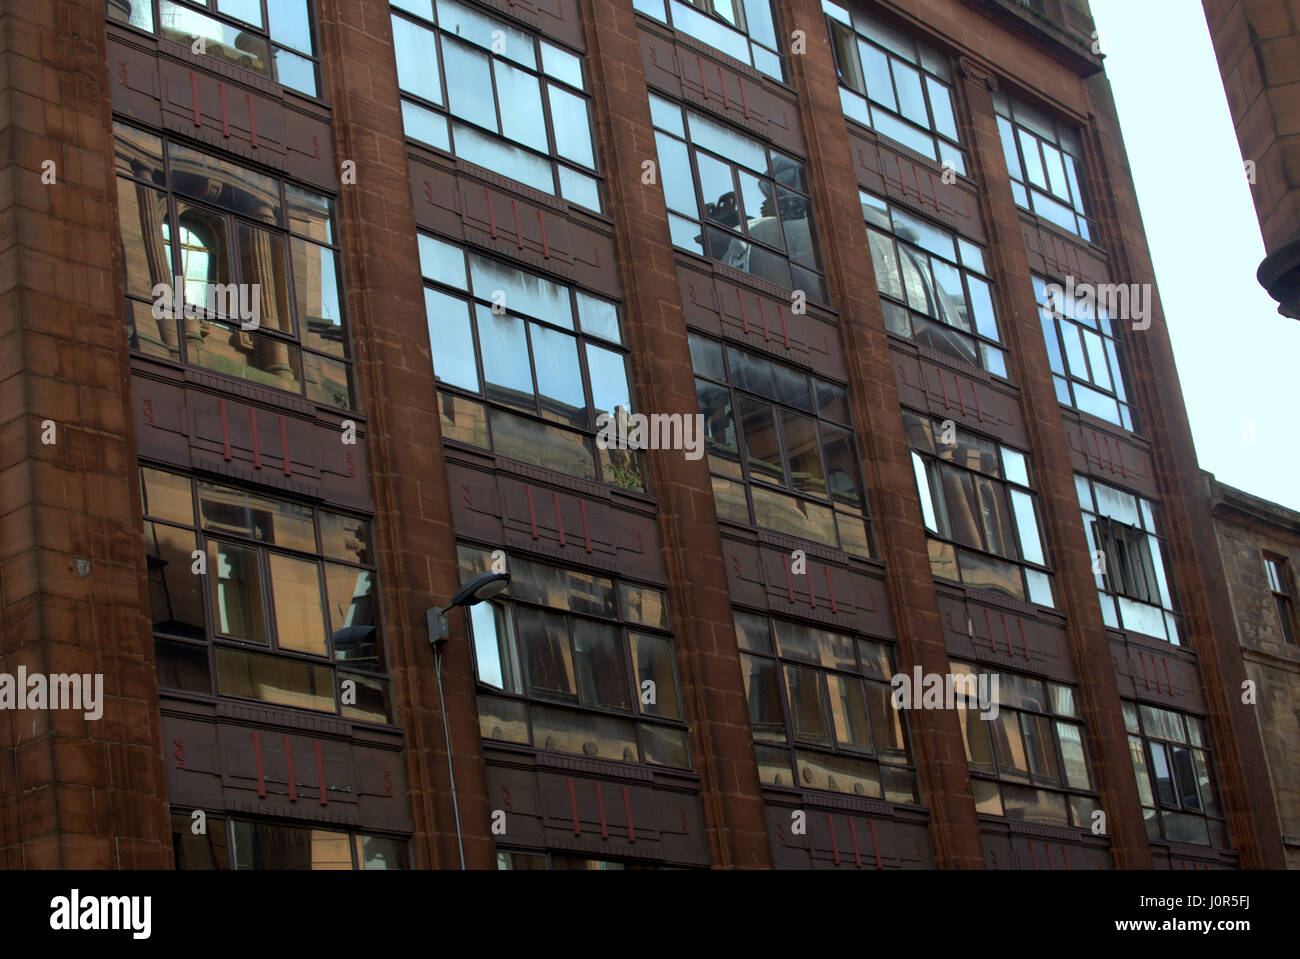 reflection of Glasgow Victorian sandstone red ornate building in later 20th century art deco industrial facade Stock Photo